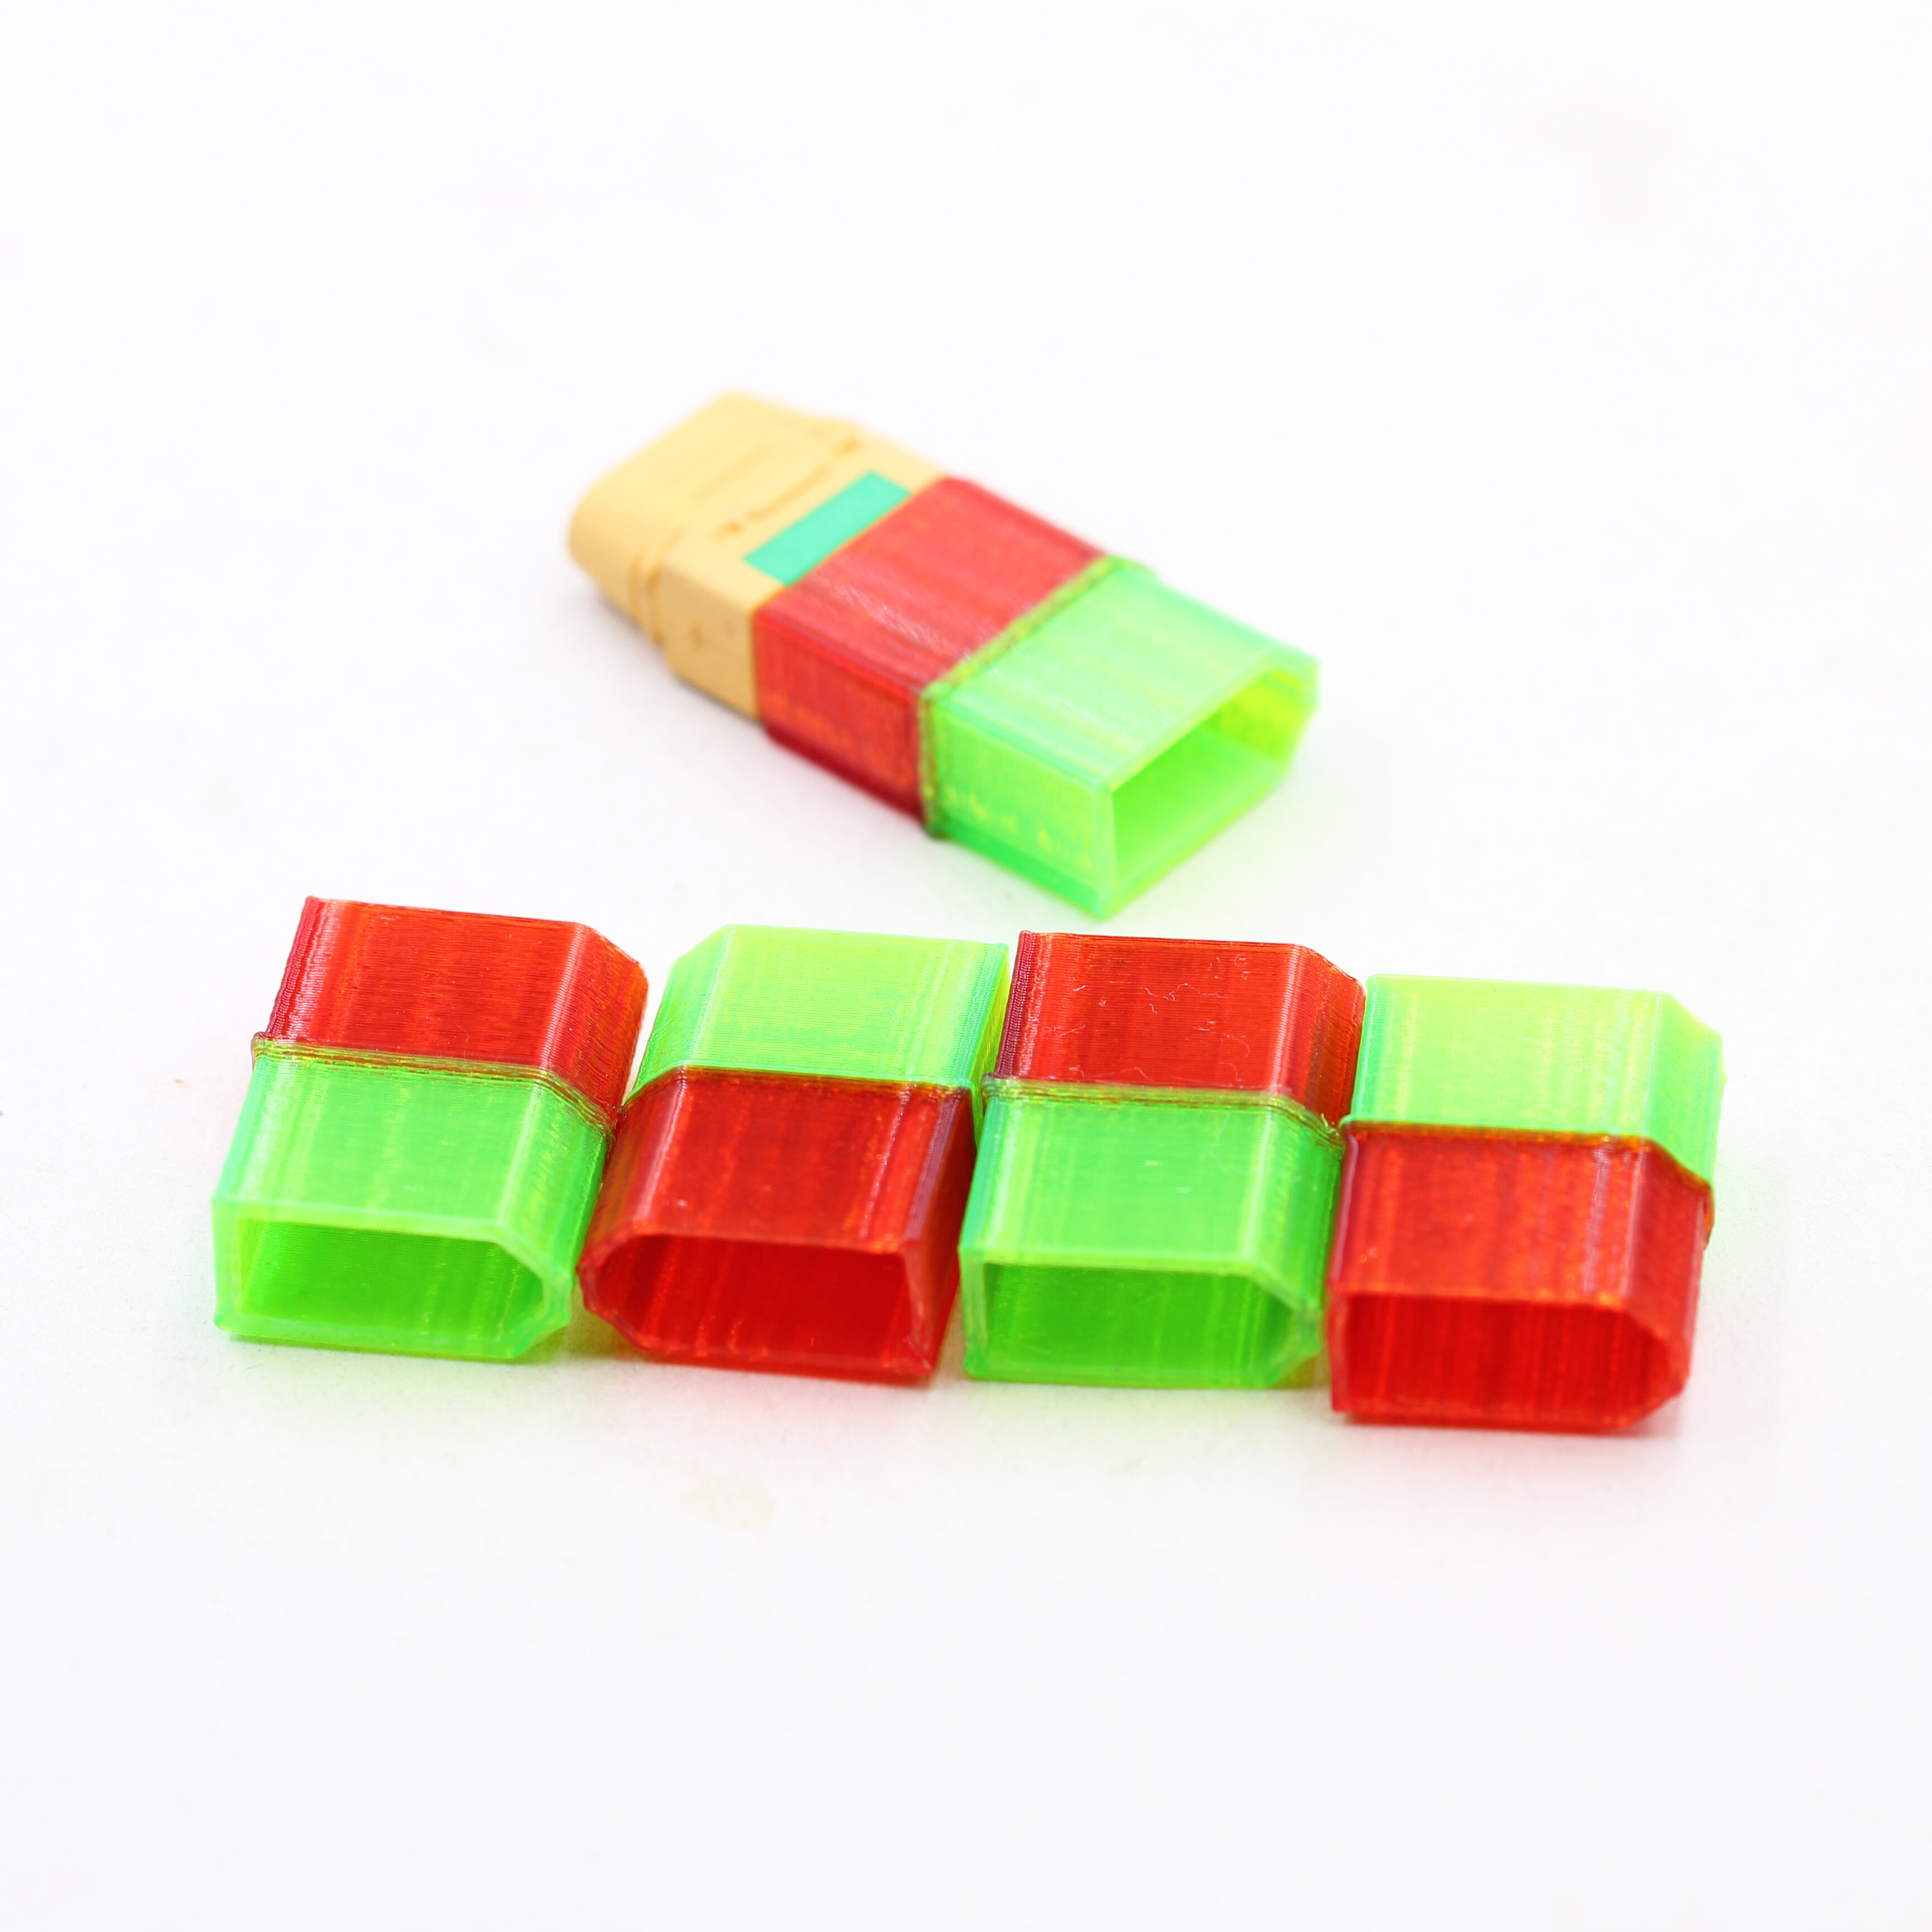 

5Pcs QY3D TPU AMASS XT90 Plug Connector Protective Case Cover for RC FPV Racing Drone Lipo Battery Spare Part